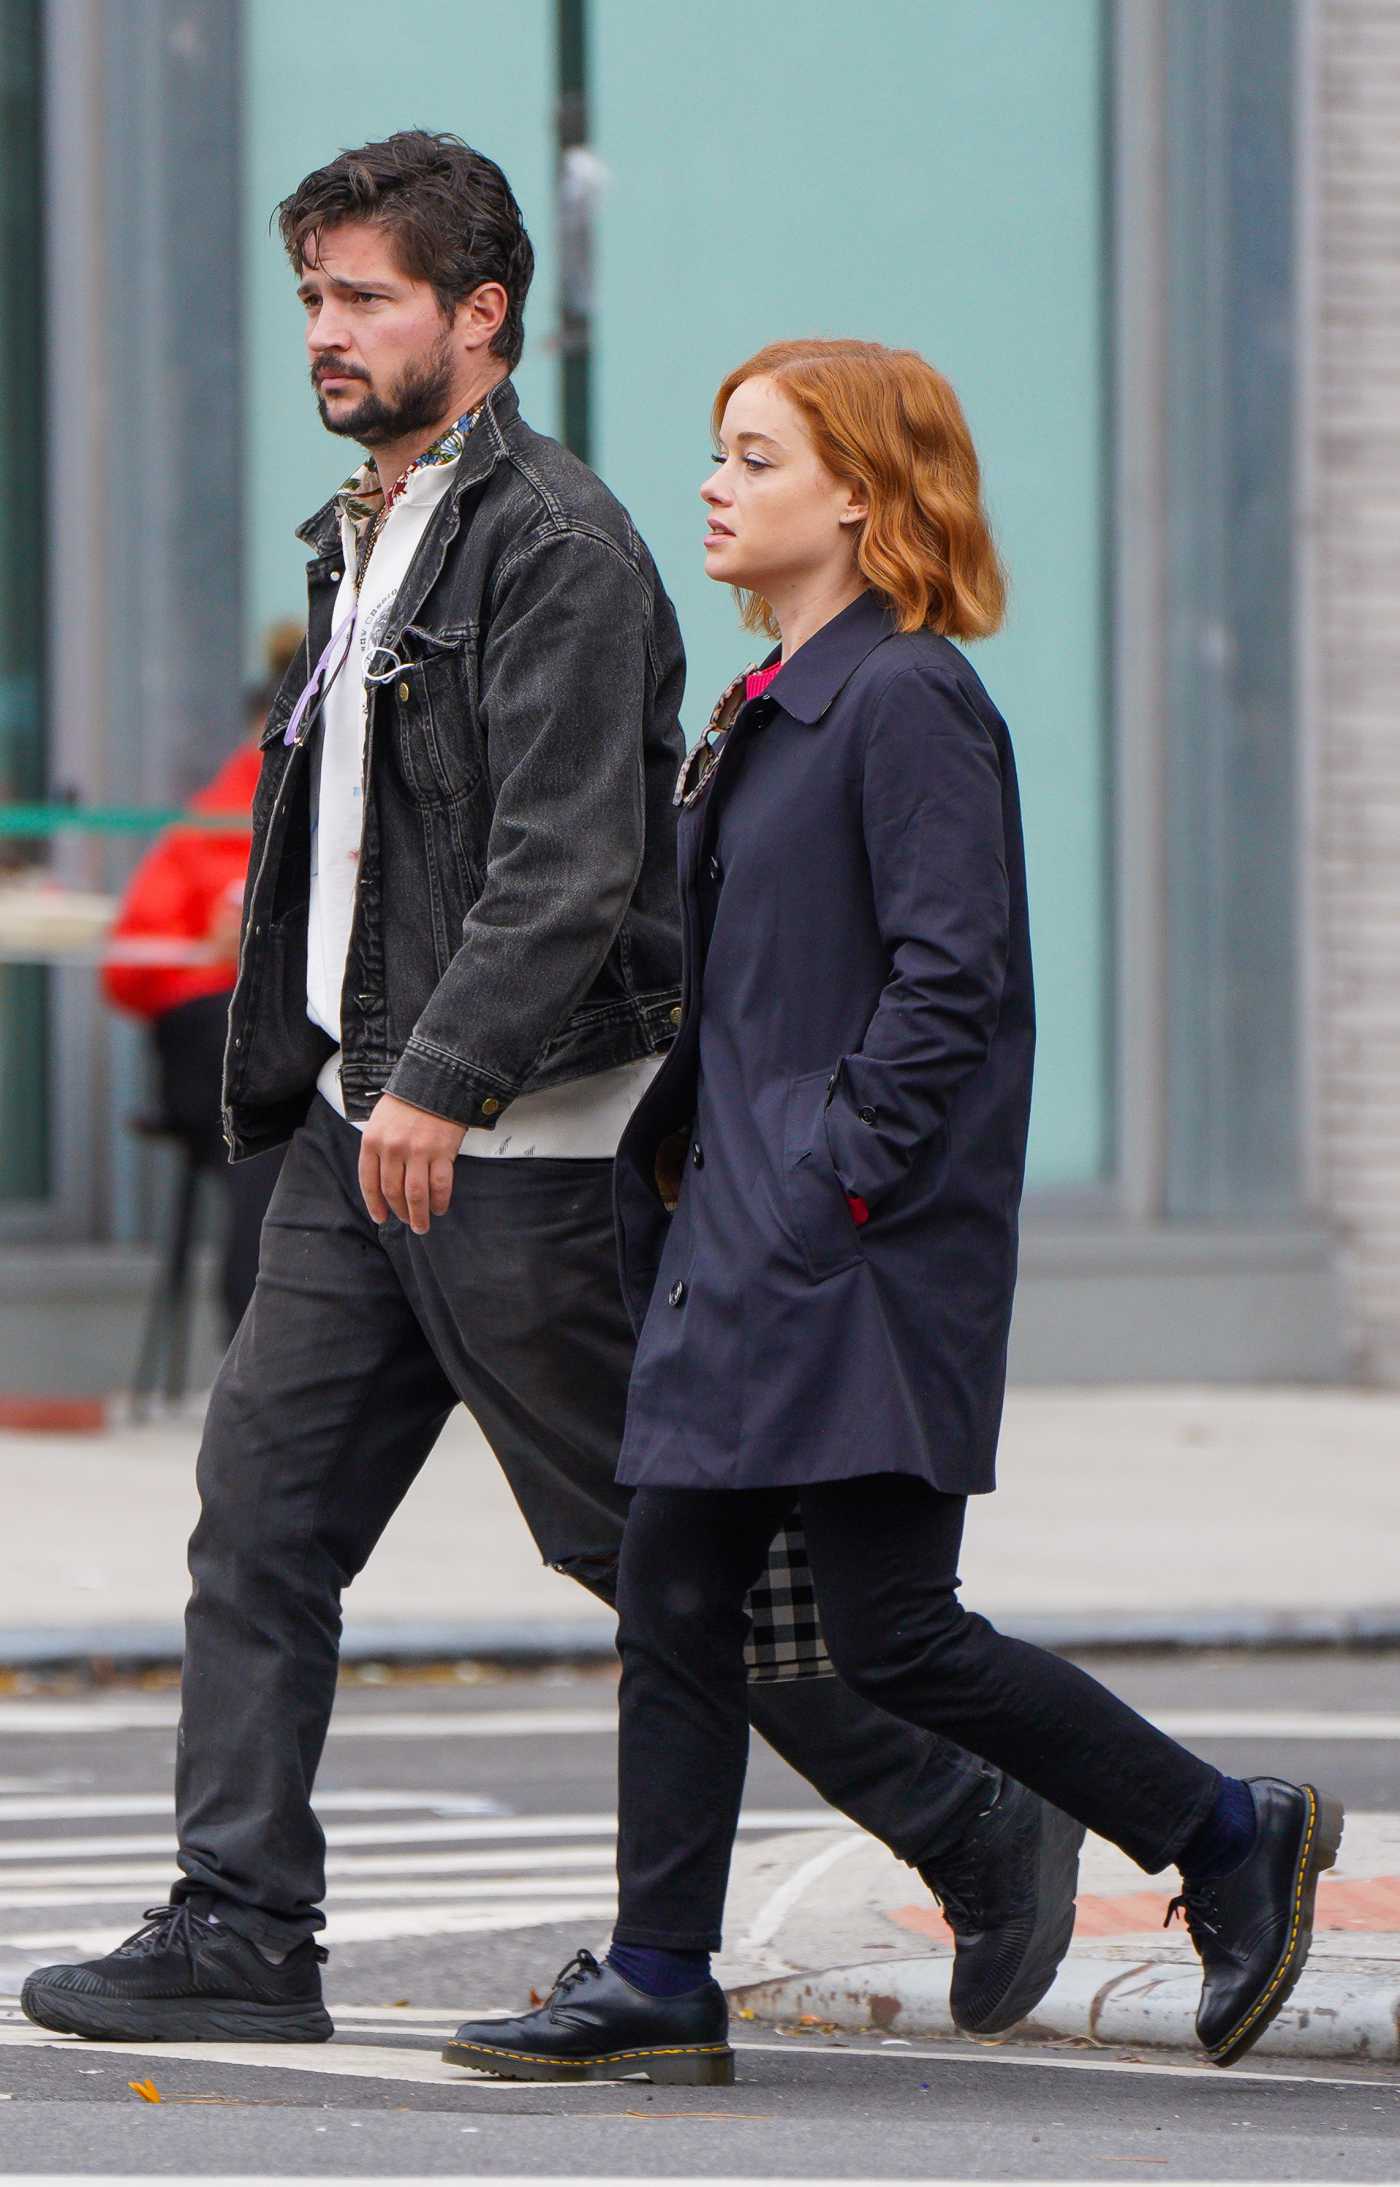 Jane Levy in a Black Outfit Was Seen Out with Thomas McDonell in New York 10/18/2021